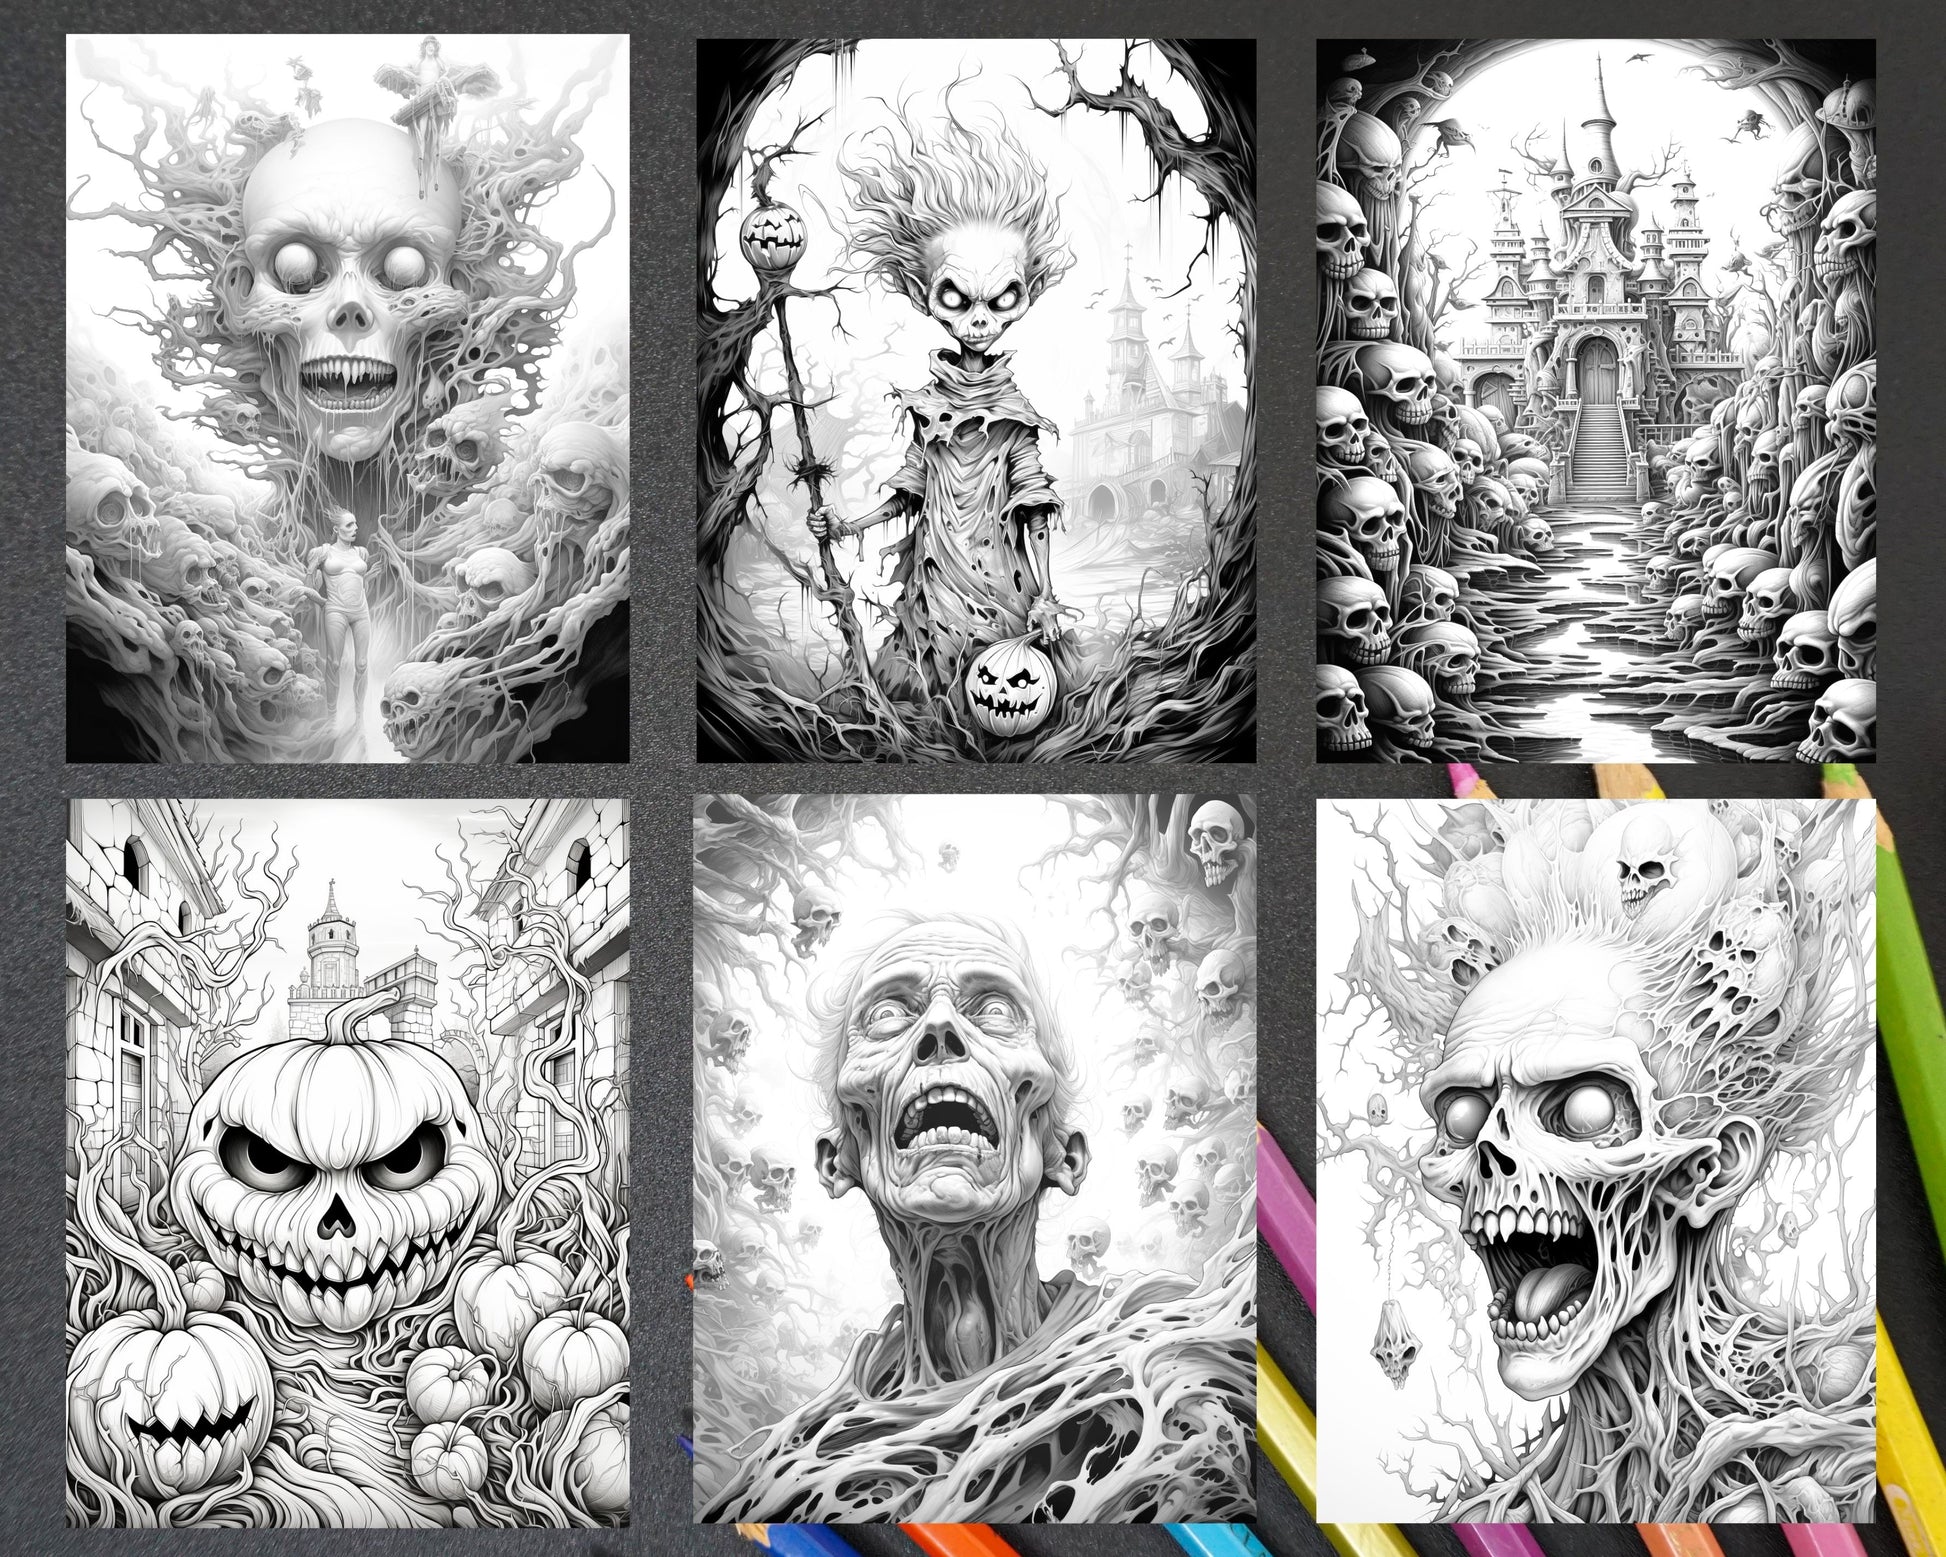 60 Halloween Nightmare Grayscale Coloring Pages Printable for Adults,   Halloween coloring pages, Grayscale coloring, Skull artwork illustrations